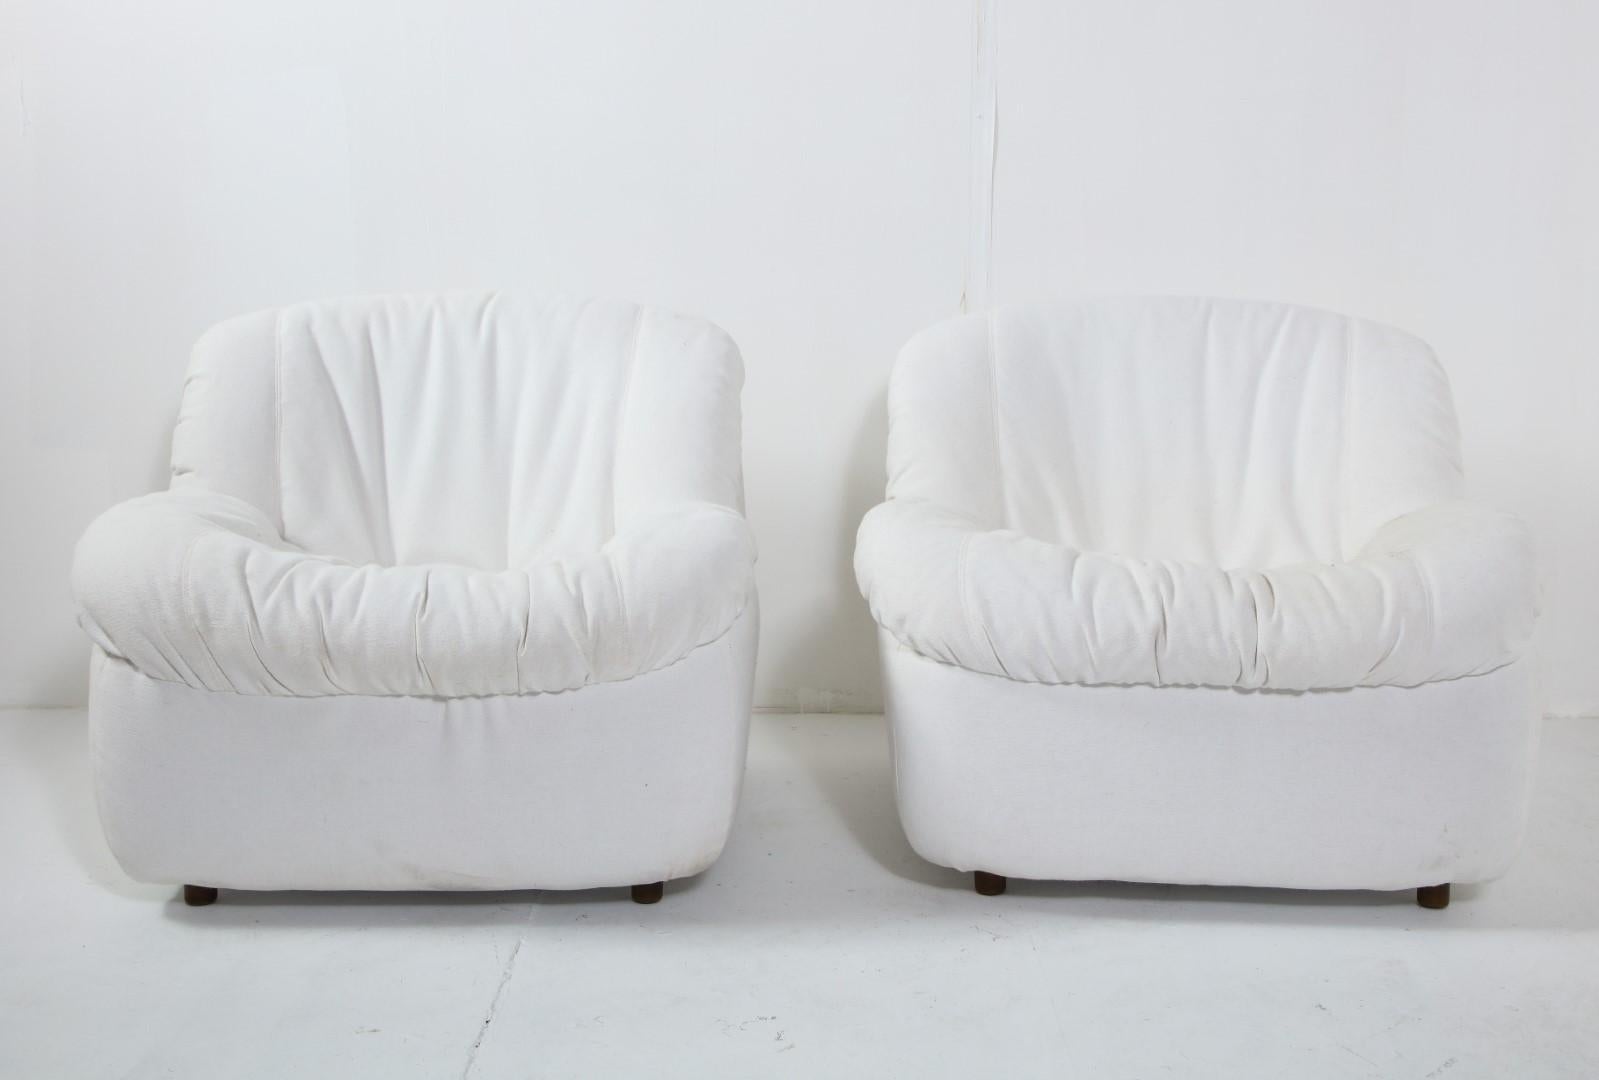 A pair of 1970s Italian club chairs on wood feet, newly upholstered in white fabric (Pindler Struxture in Vapor) and resembling soft cotton clouds.